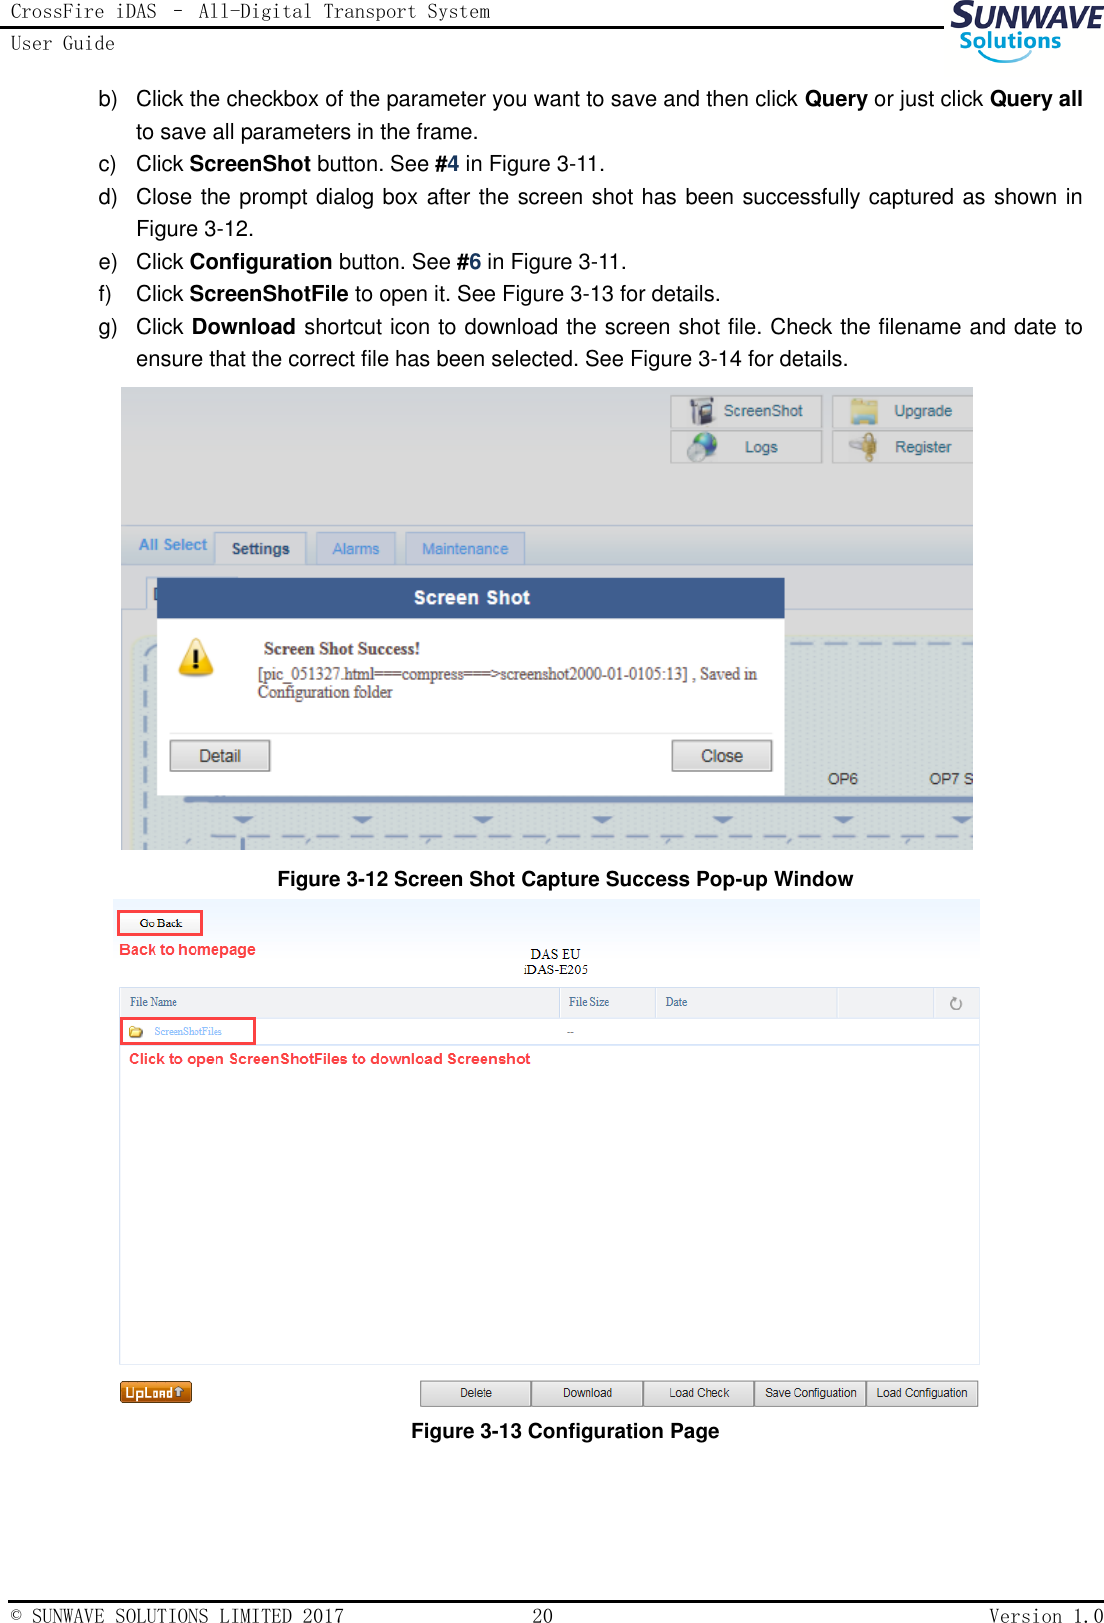 CrossFire iDAS – All-Digital Transport System User Guide   © SUNWAVE SOLUTIONS LIMITED 2017  20  Version 1.0  b)  Click the checkbox of the parameter you want to save and then click Query or just click Query all to save all parameters in the frame. c)  Click ScreenShot button. See #4 in Figure 3-11. d)  Close the prompt dialog box after the screen shot has been successfully captured as shown in Figure 3-12. e)  Click Configuration button. See #6 in Figure 3-11. f)  Click ScreenShotFile to open it. See Figure 3-13 for details. g)  Click Download shortcut icon to download the screen shot file. Check the filename and date to ensure that the correct file has been selected. See Figure 3-14 for details.  Figure 3-12 Screen Shot Capture Success Pop-up Window  Figure 3-13 Configuration Page  